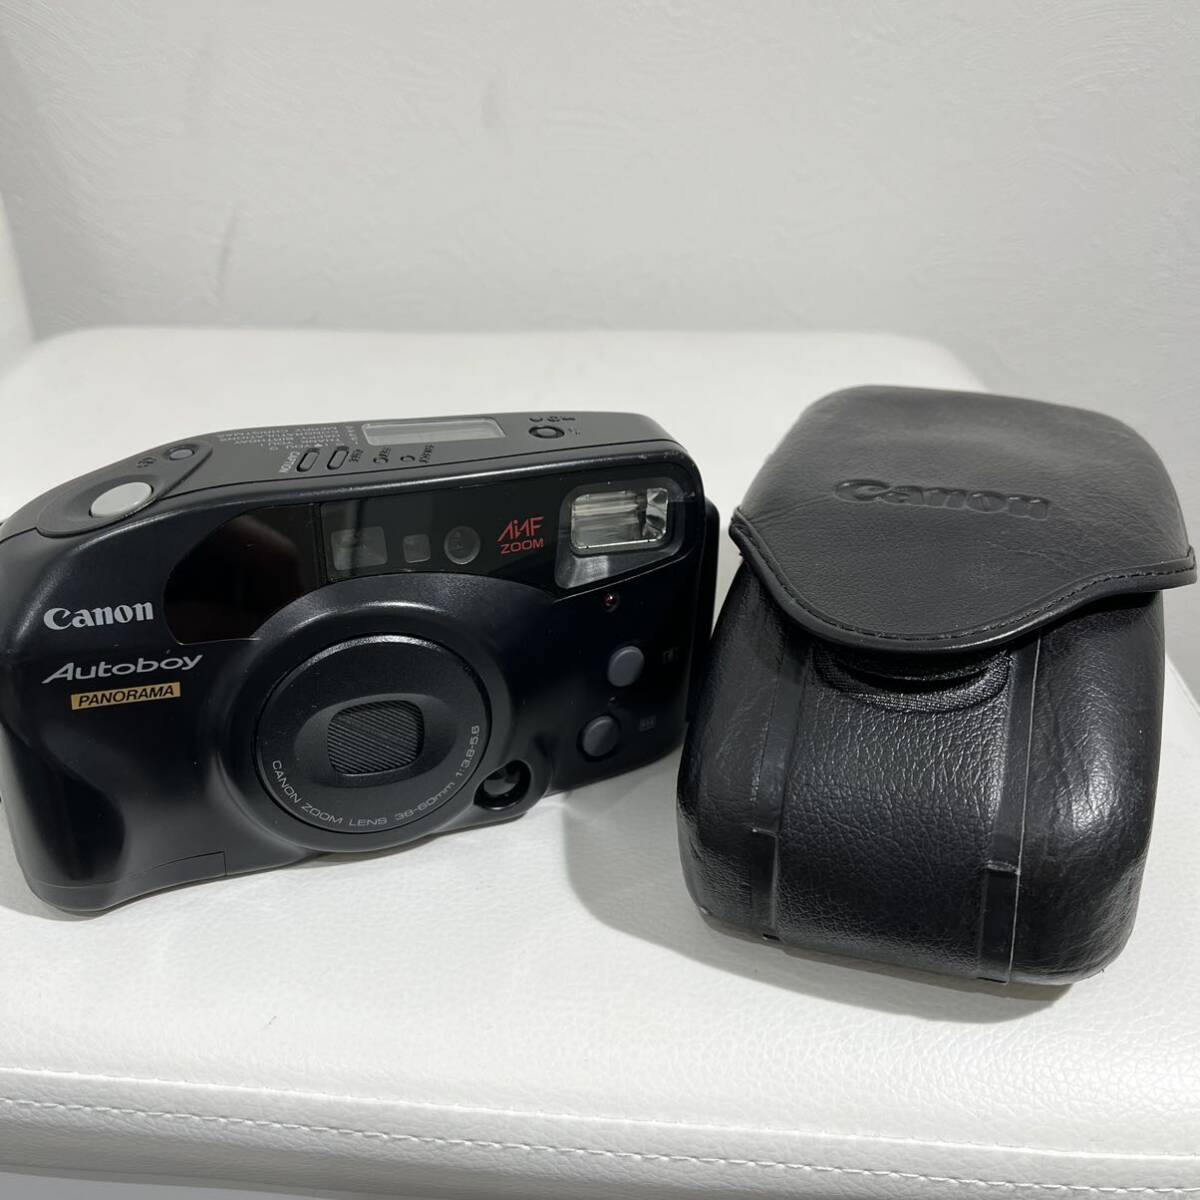 Canon Autoboy PANORAMA AiAF ZOOM コンパクトフィルムカメラ オートボーイ フィルムカメラ 中古 ジャンク_画像2